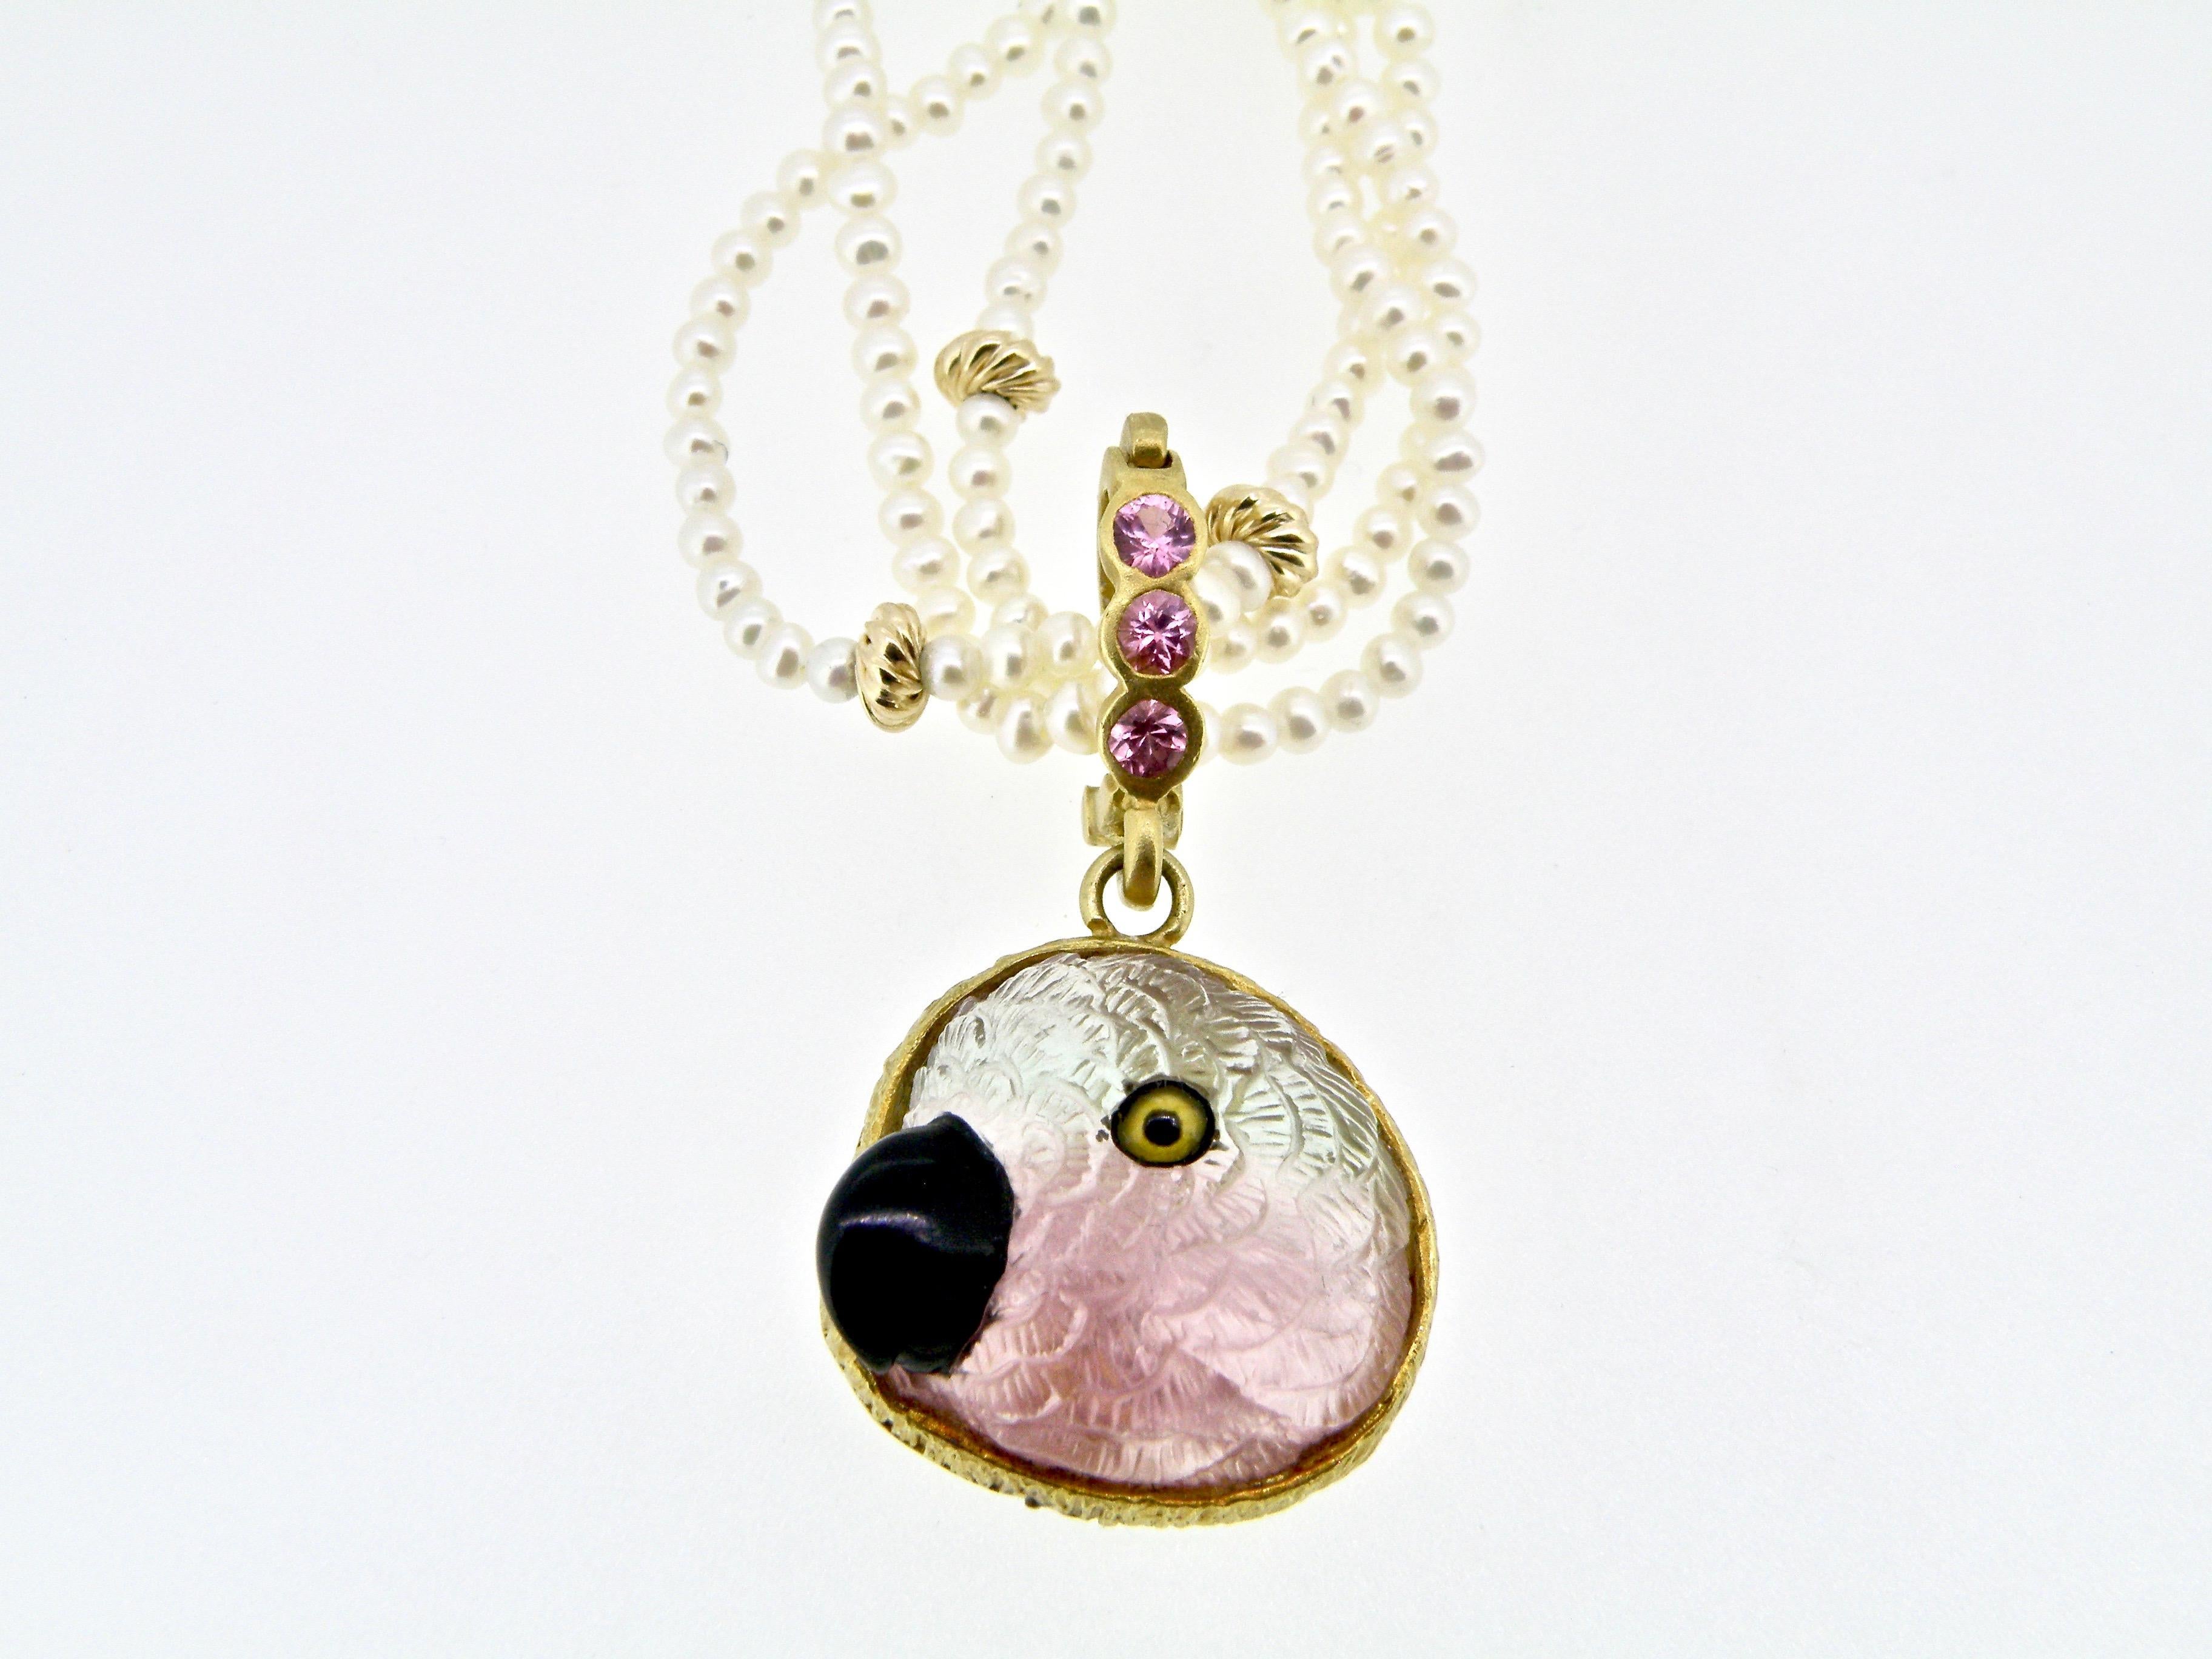 18K bicolored toumaline parrot pendant with onyx beakand citrine eyes ansd pink sapphire bail 
approx 0mm x 18mm